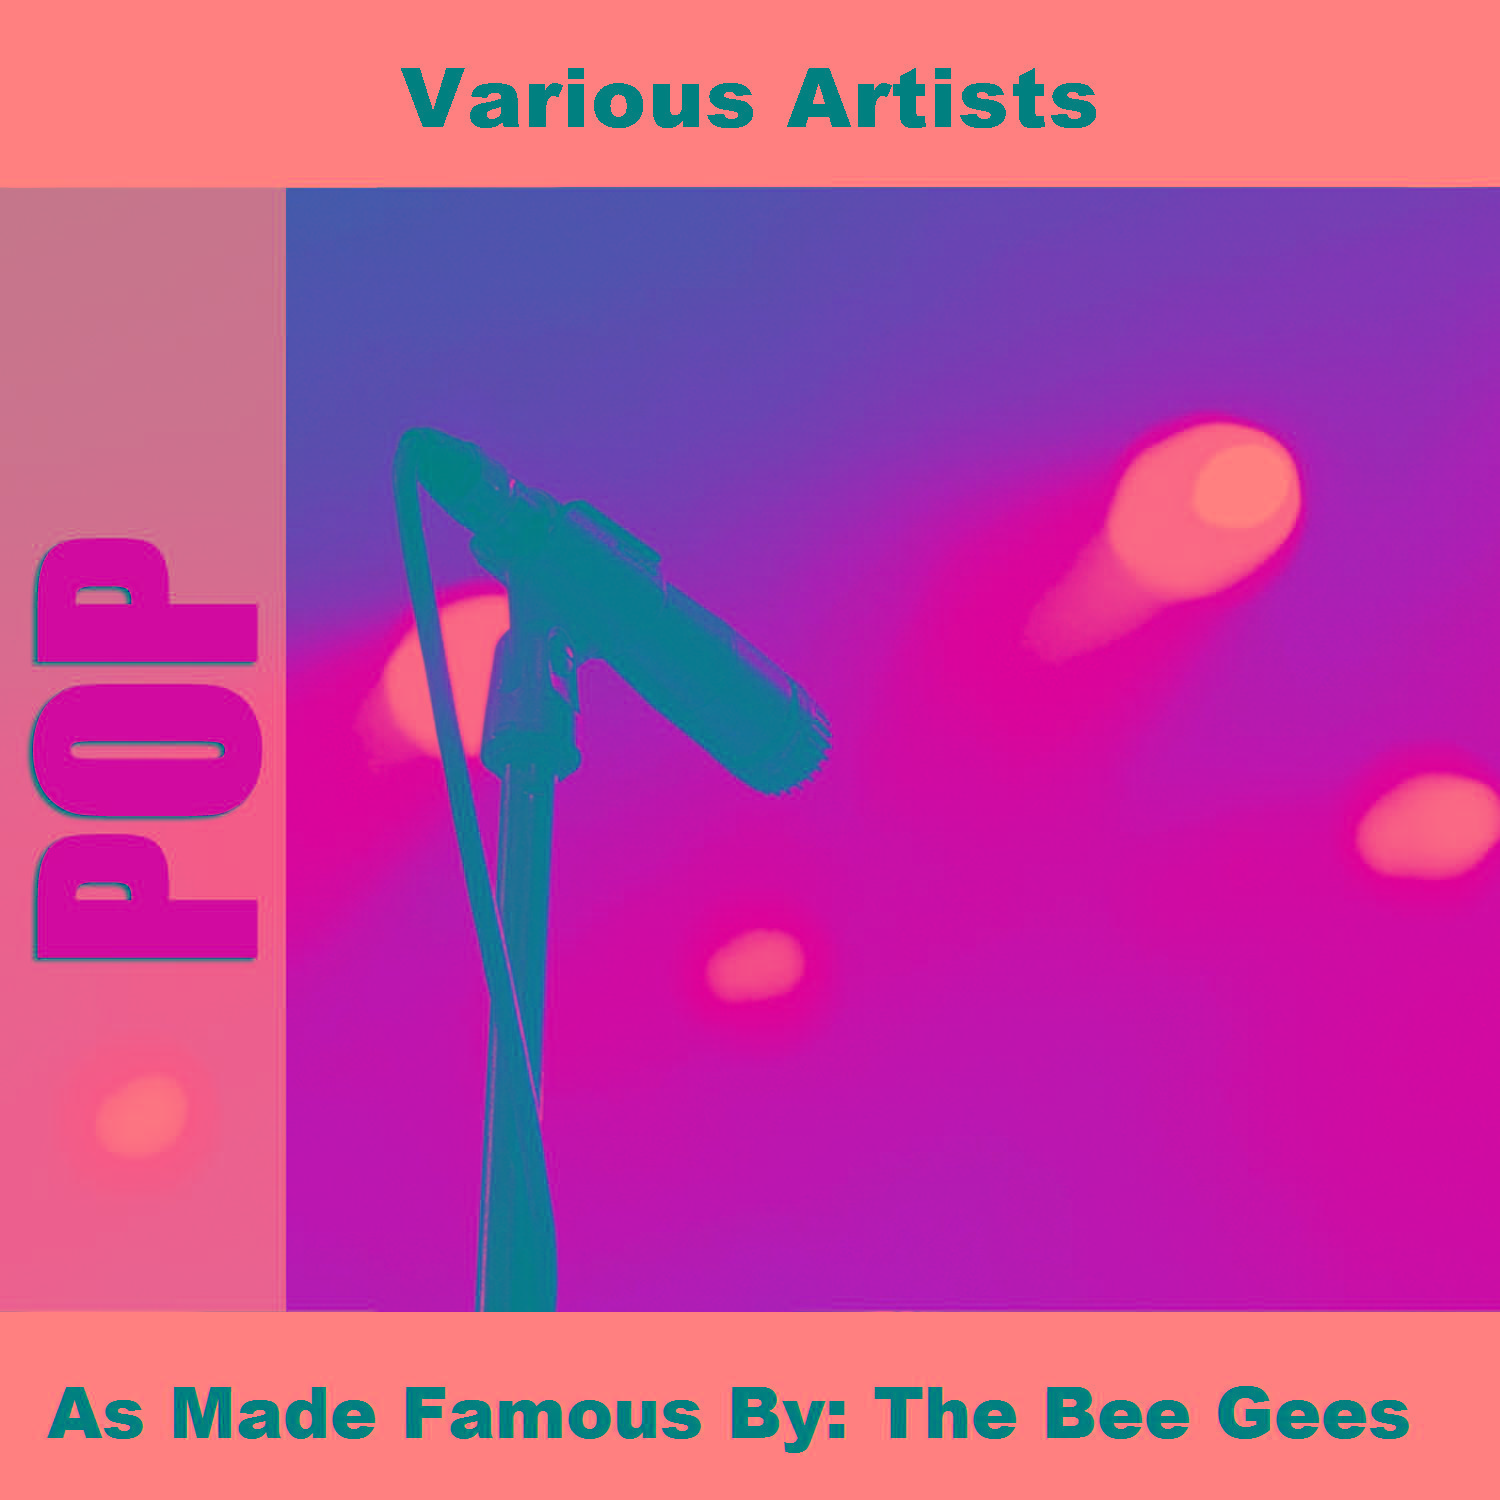 As Made Famous By: The Bee Gees